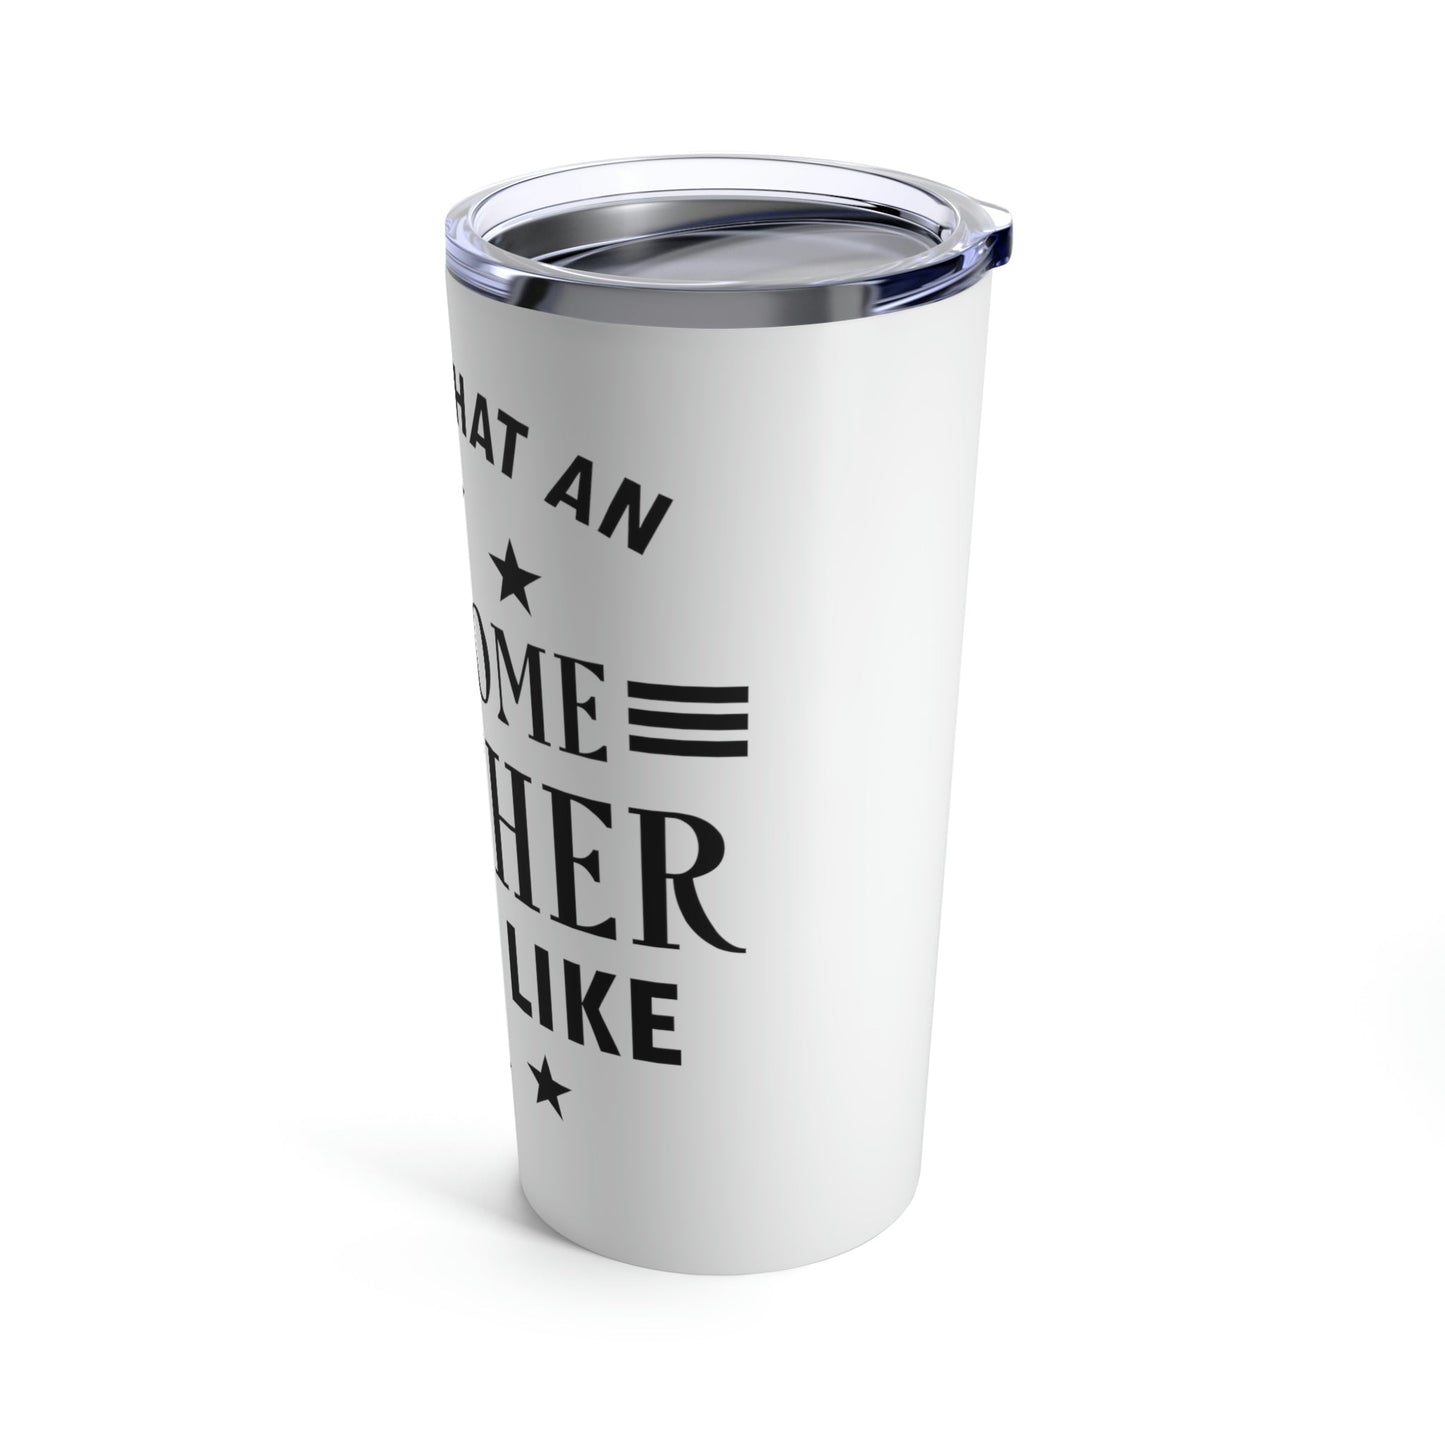 Awesome Brother Funny Slogan Sarcastic Quotes Stainless Steel Hot or Cold Vacuum Tumbler 20oz Ichaku [Perfect Gifts Selection]